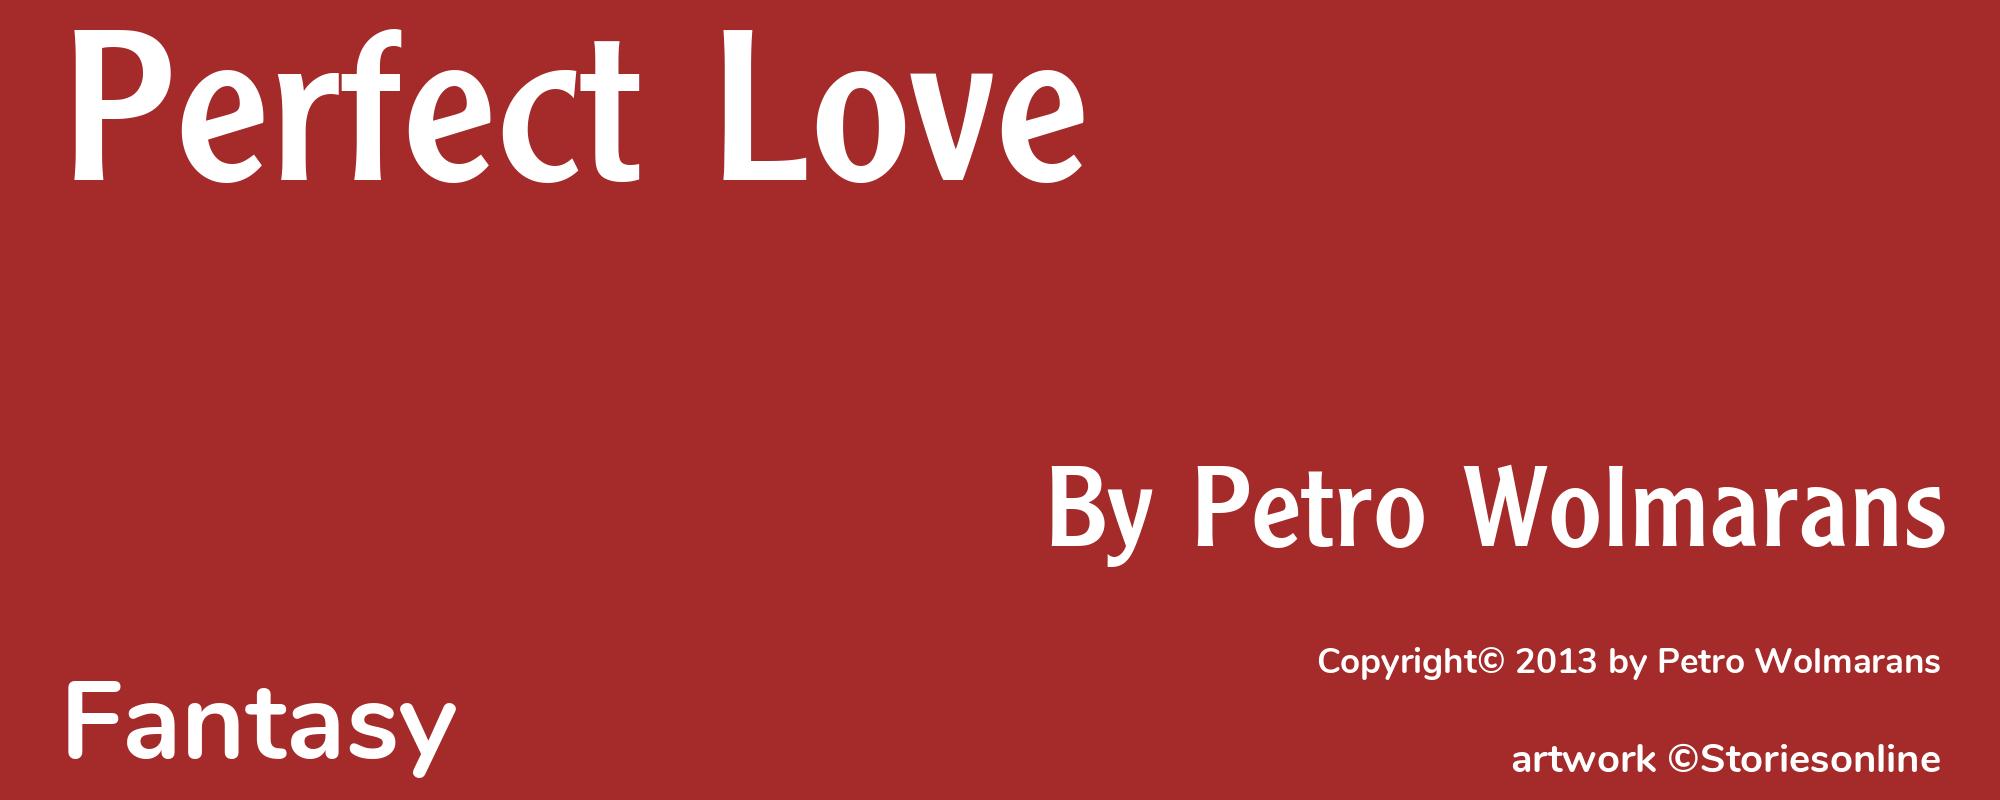 Perfect Love - Cover